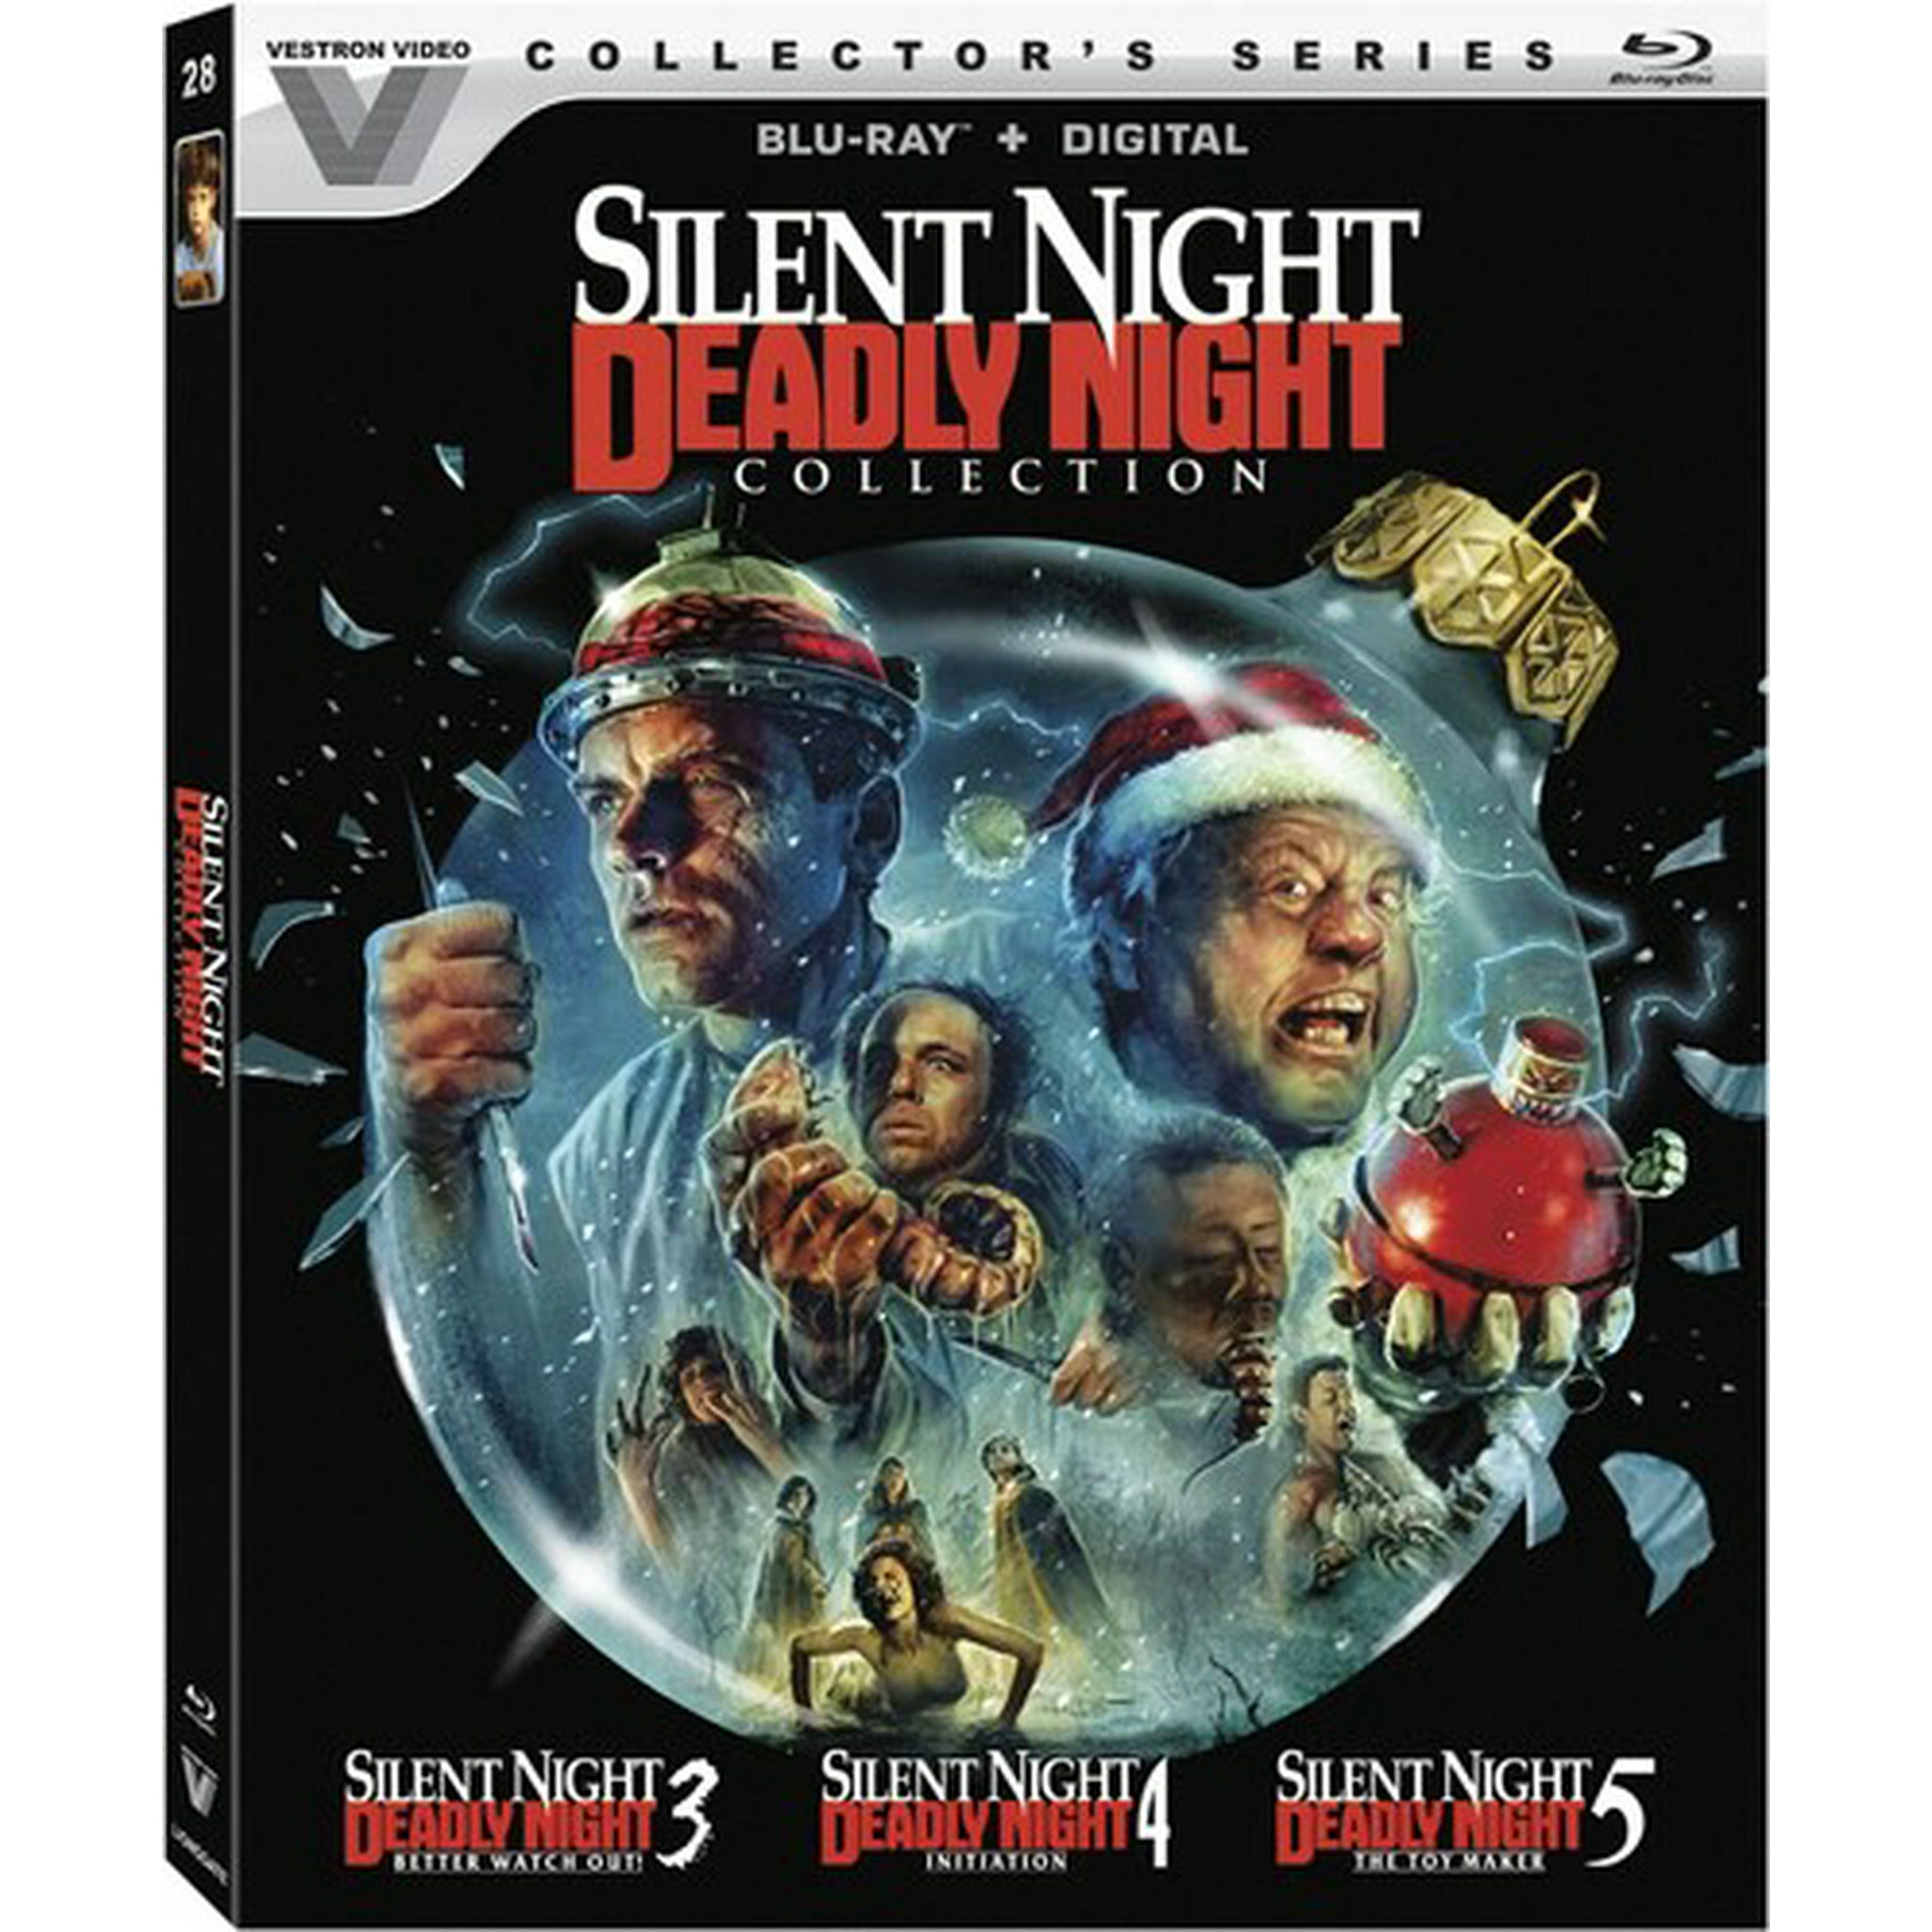 Silent Night, Deadly Night 3-Film Collection [BLU-RAY] 3 Pack